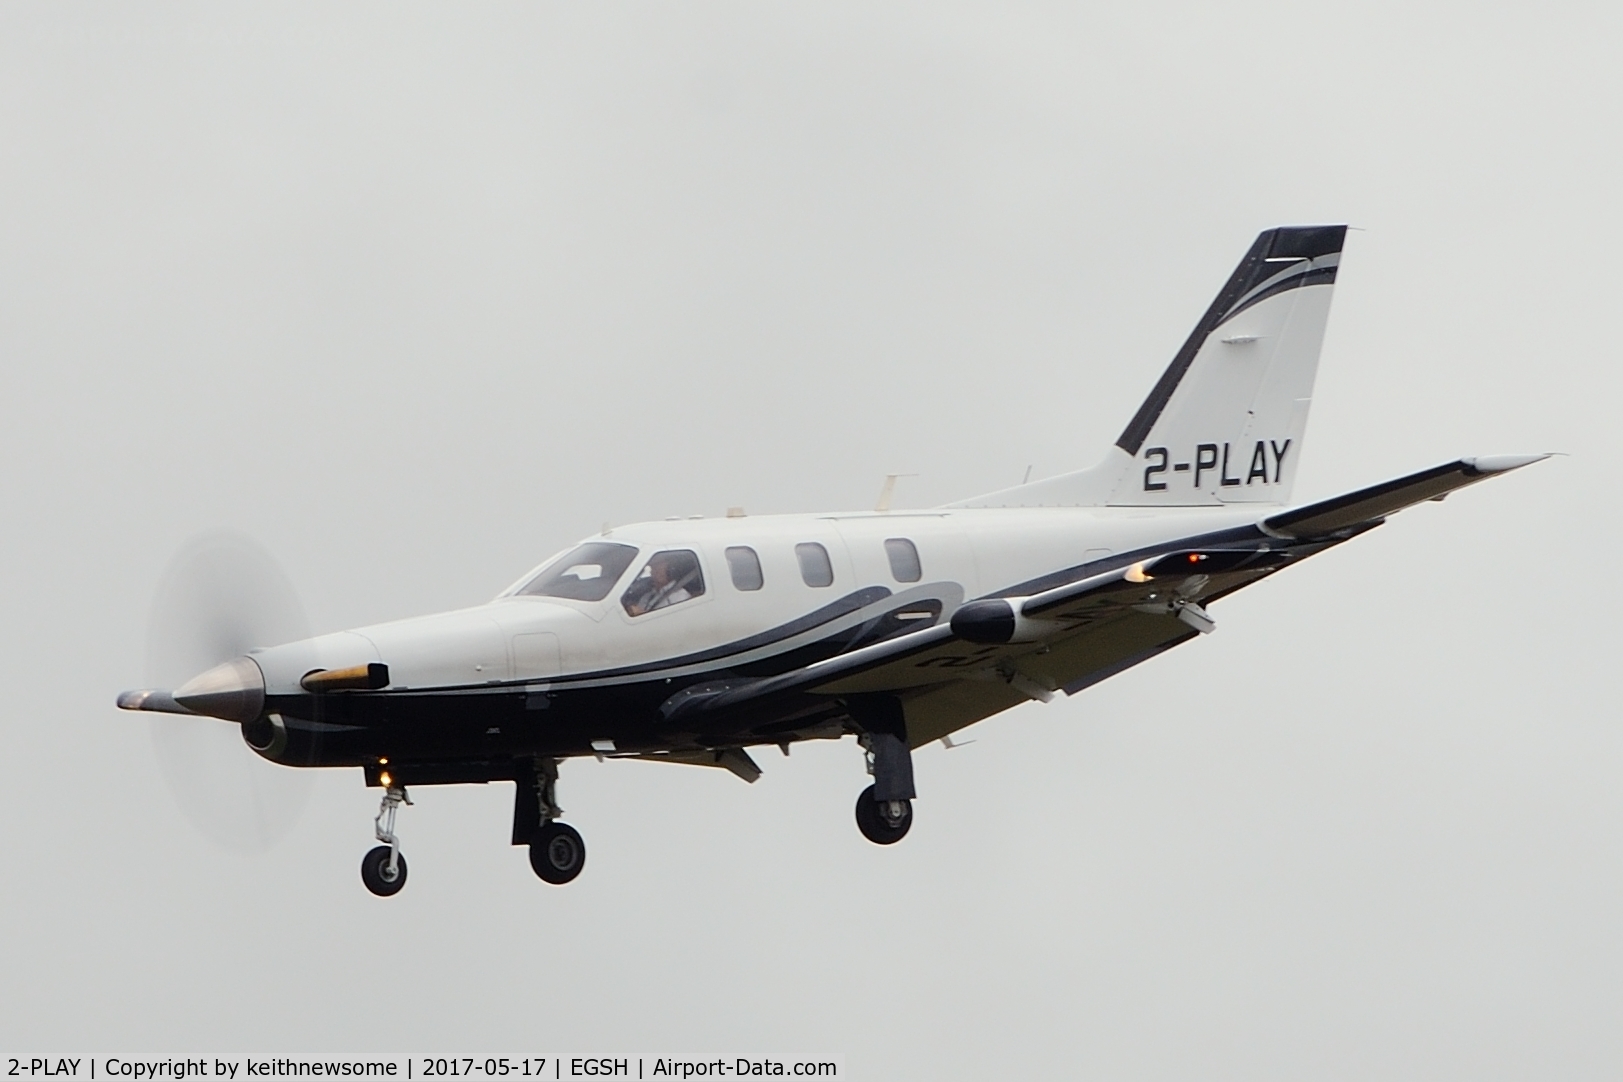 2-PLAY, 2004 Socata TBM-700 C/N 302, Arriving with new colour scheme.